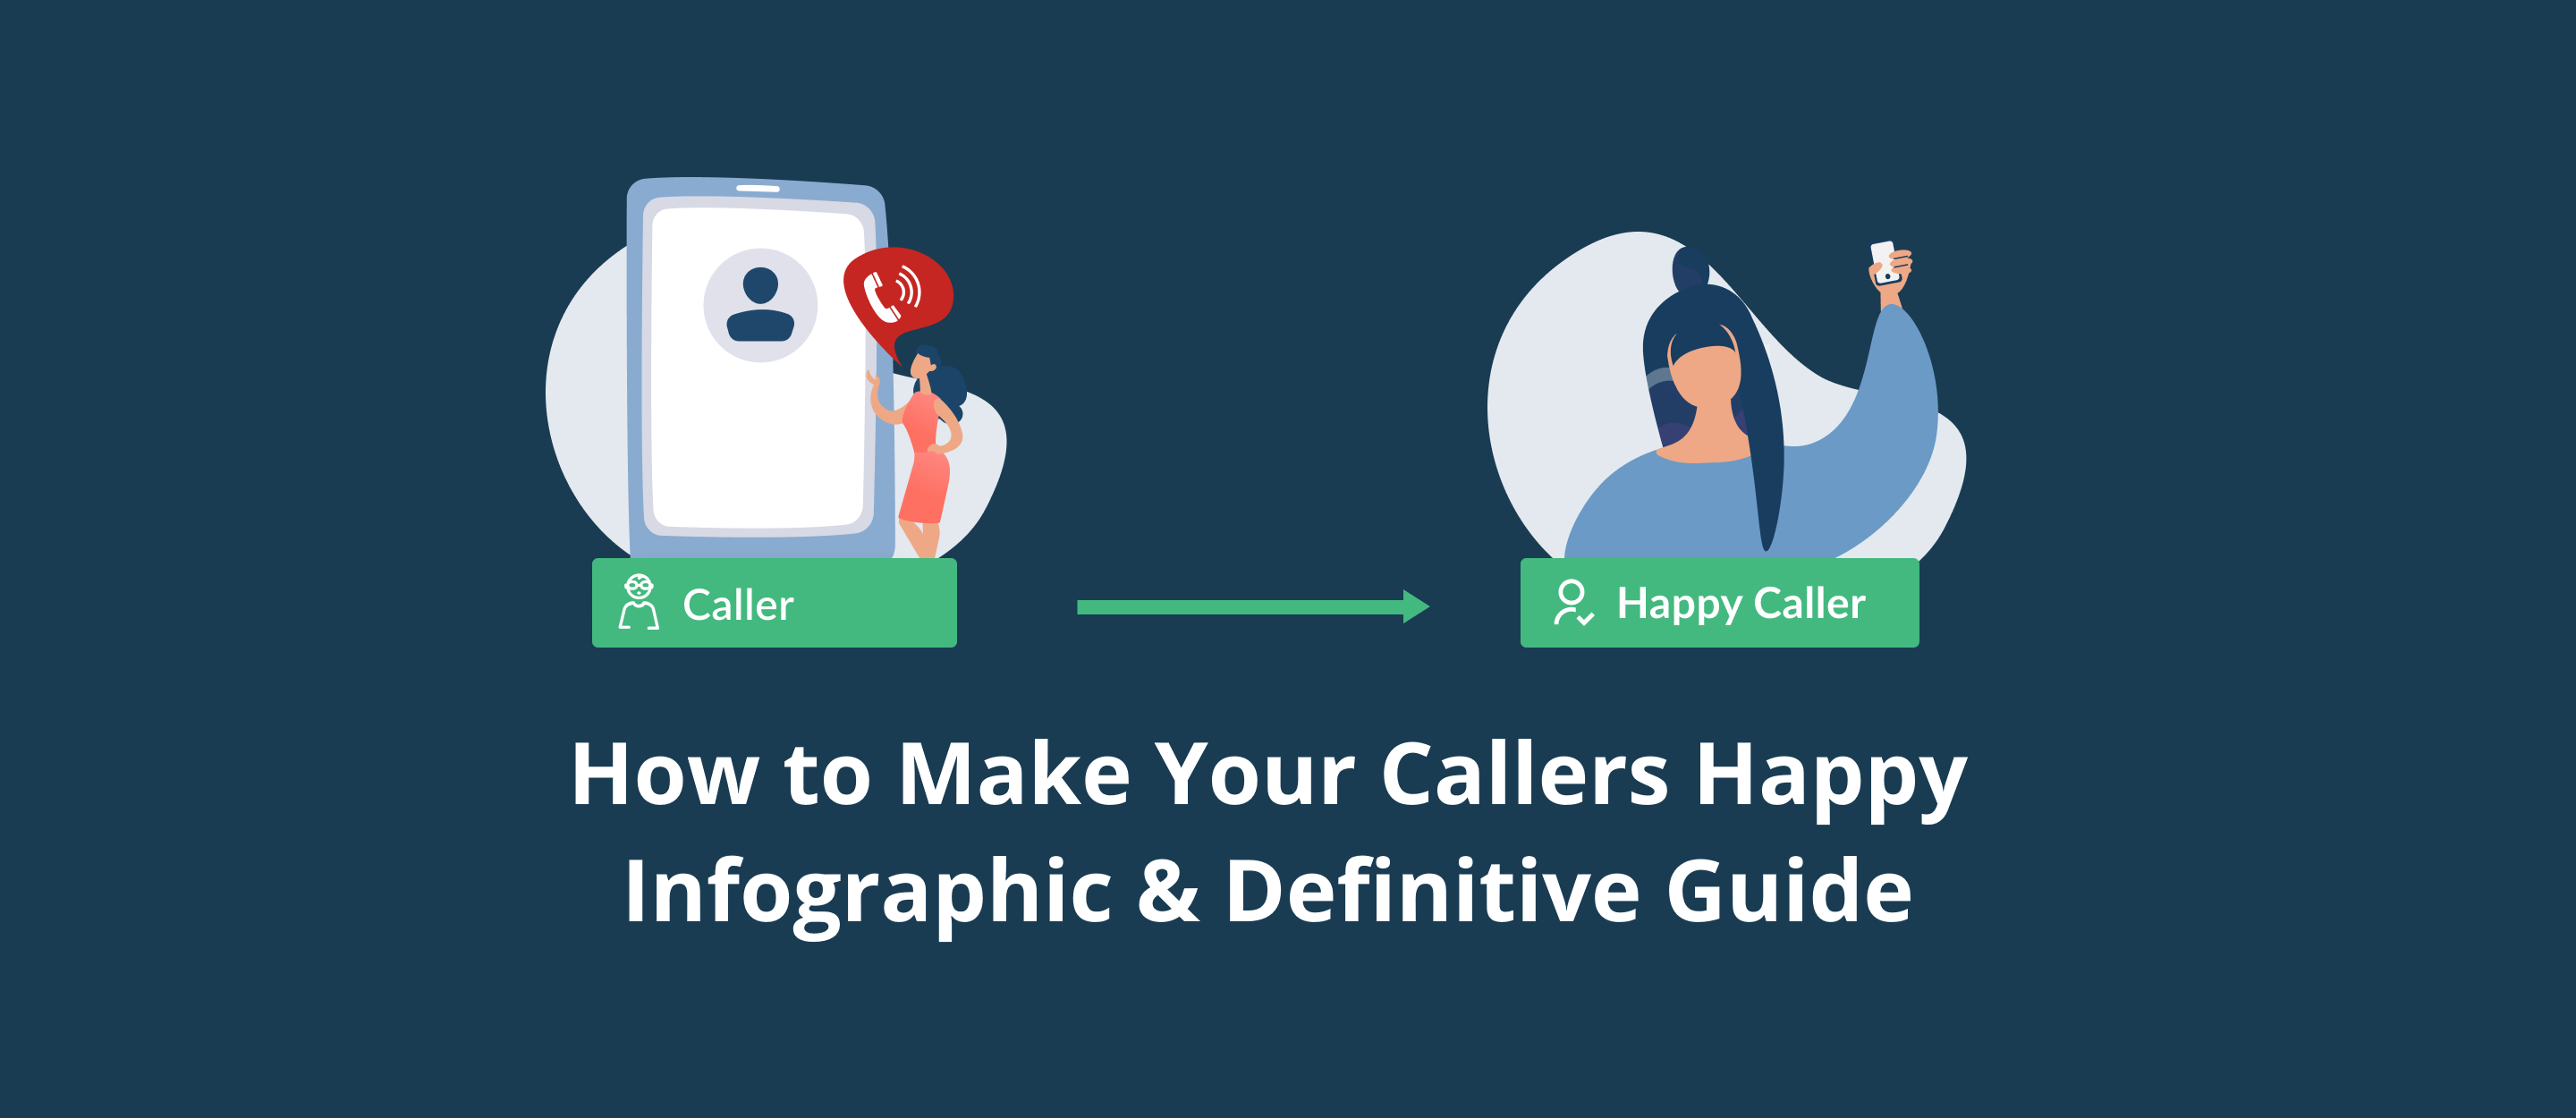 How to Make Your Callers Happy, find your infographic and definitive guide here.